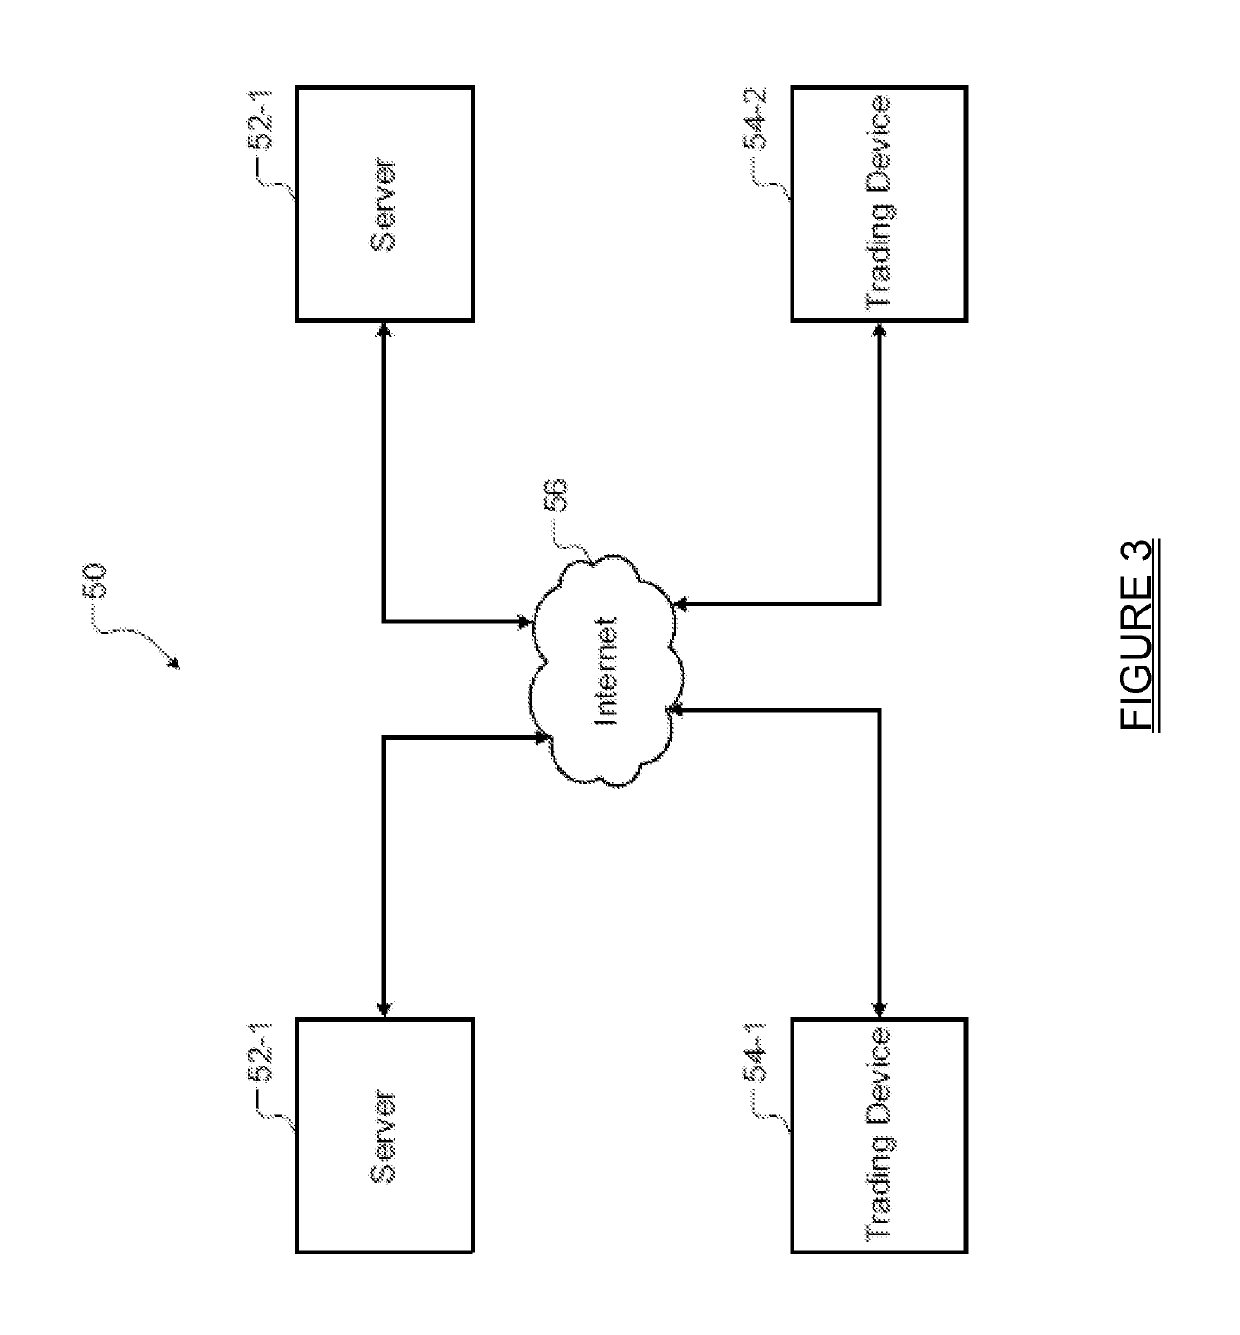 System and method for Sharia-based energy market hedging and related